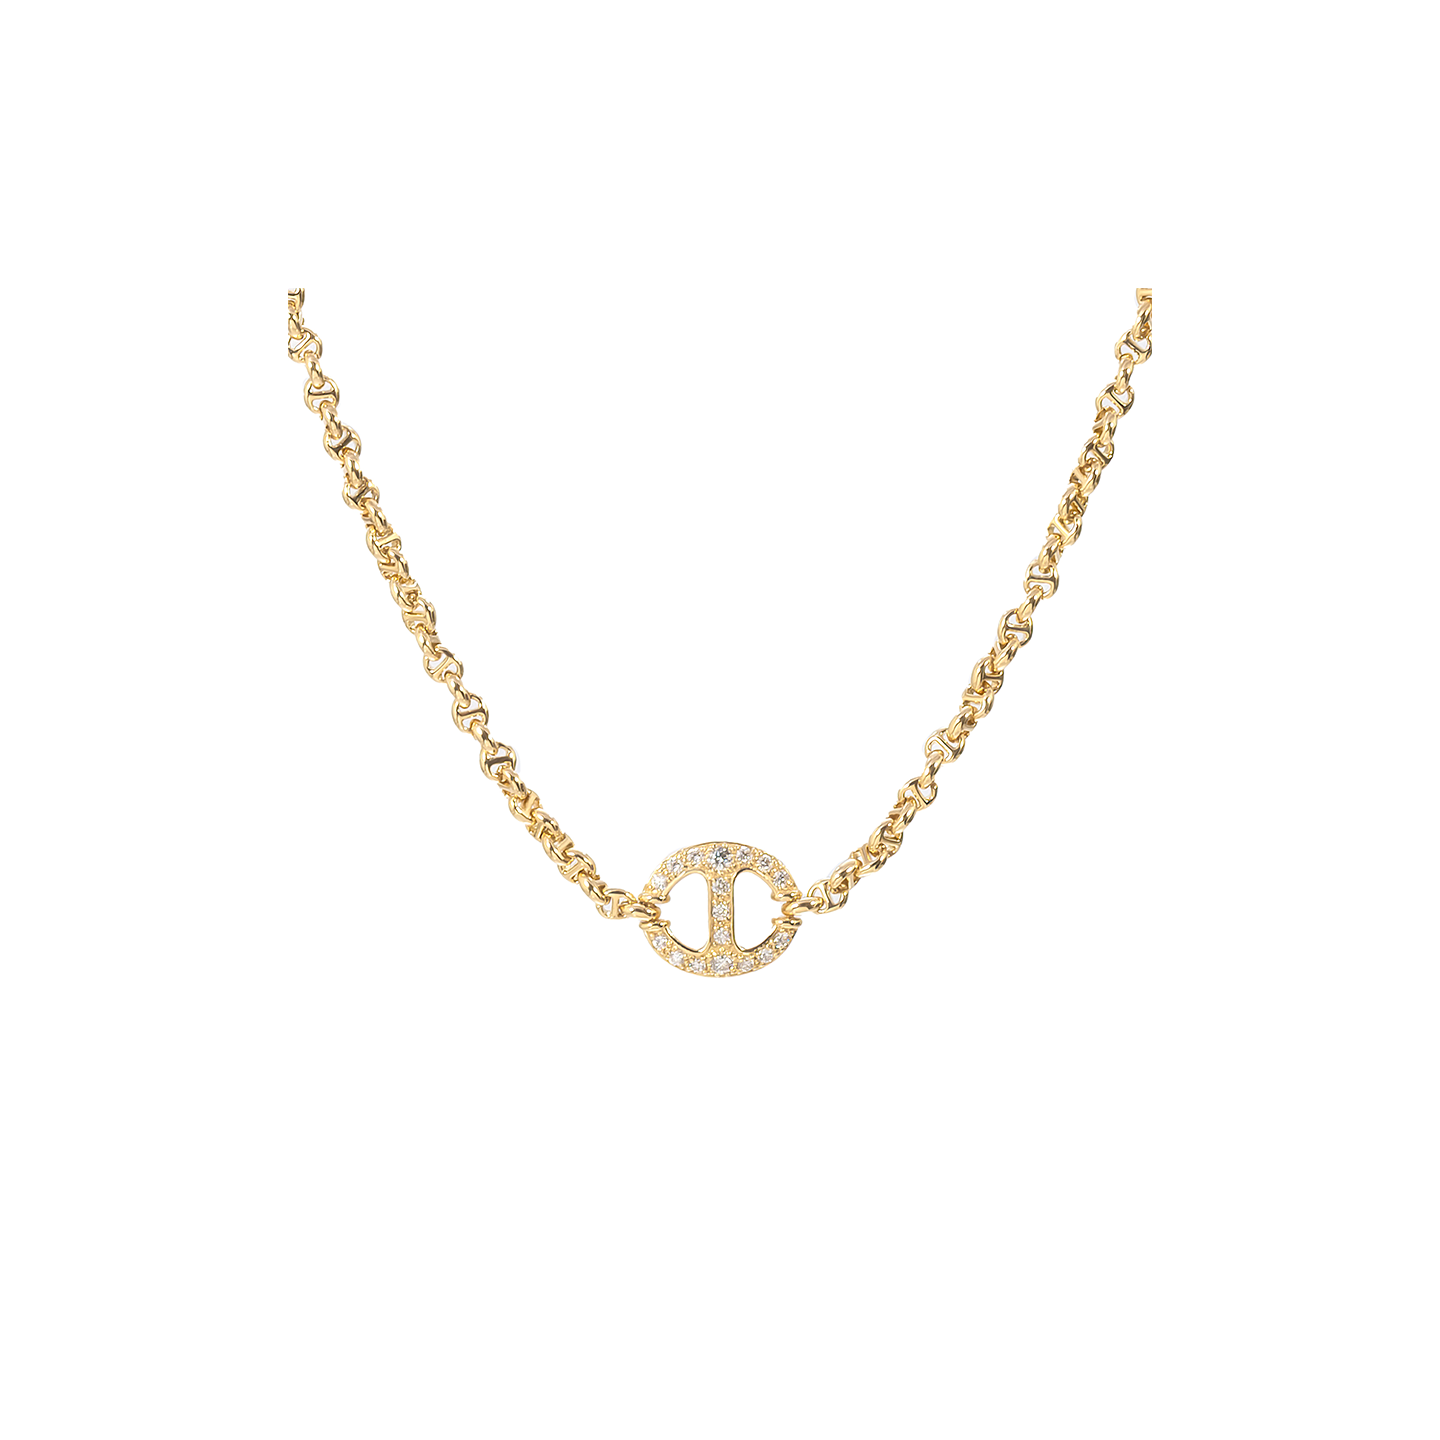 Hoorsenbuhs Micro Chain Necklace with Diamond Station